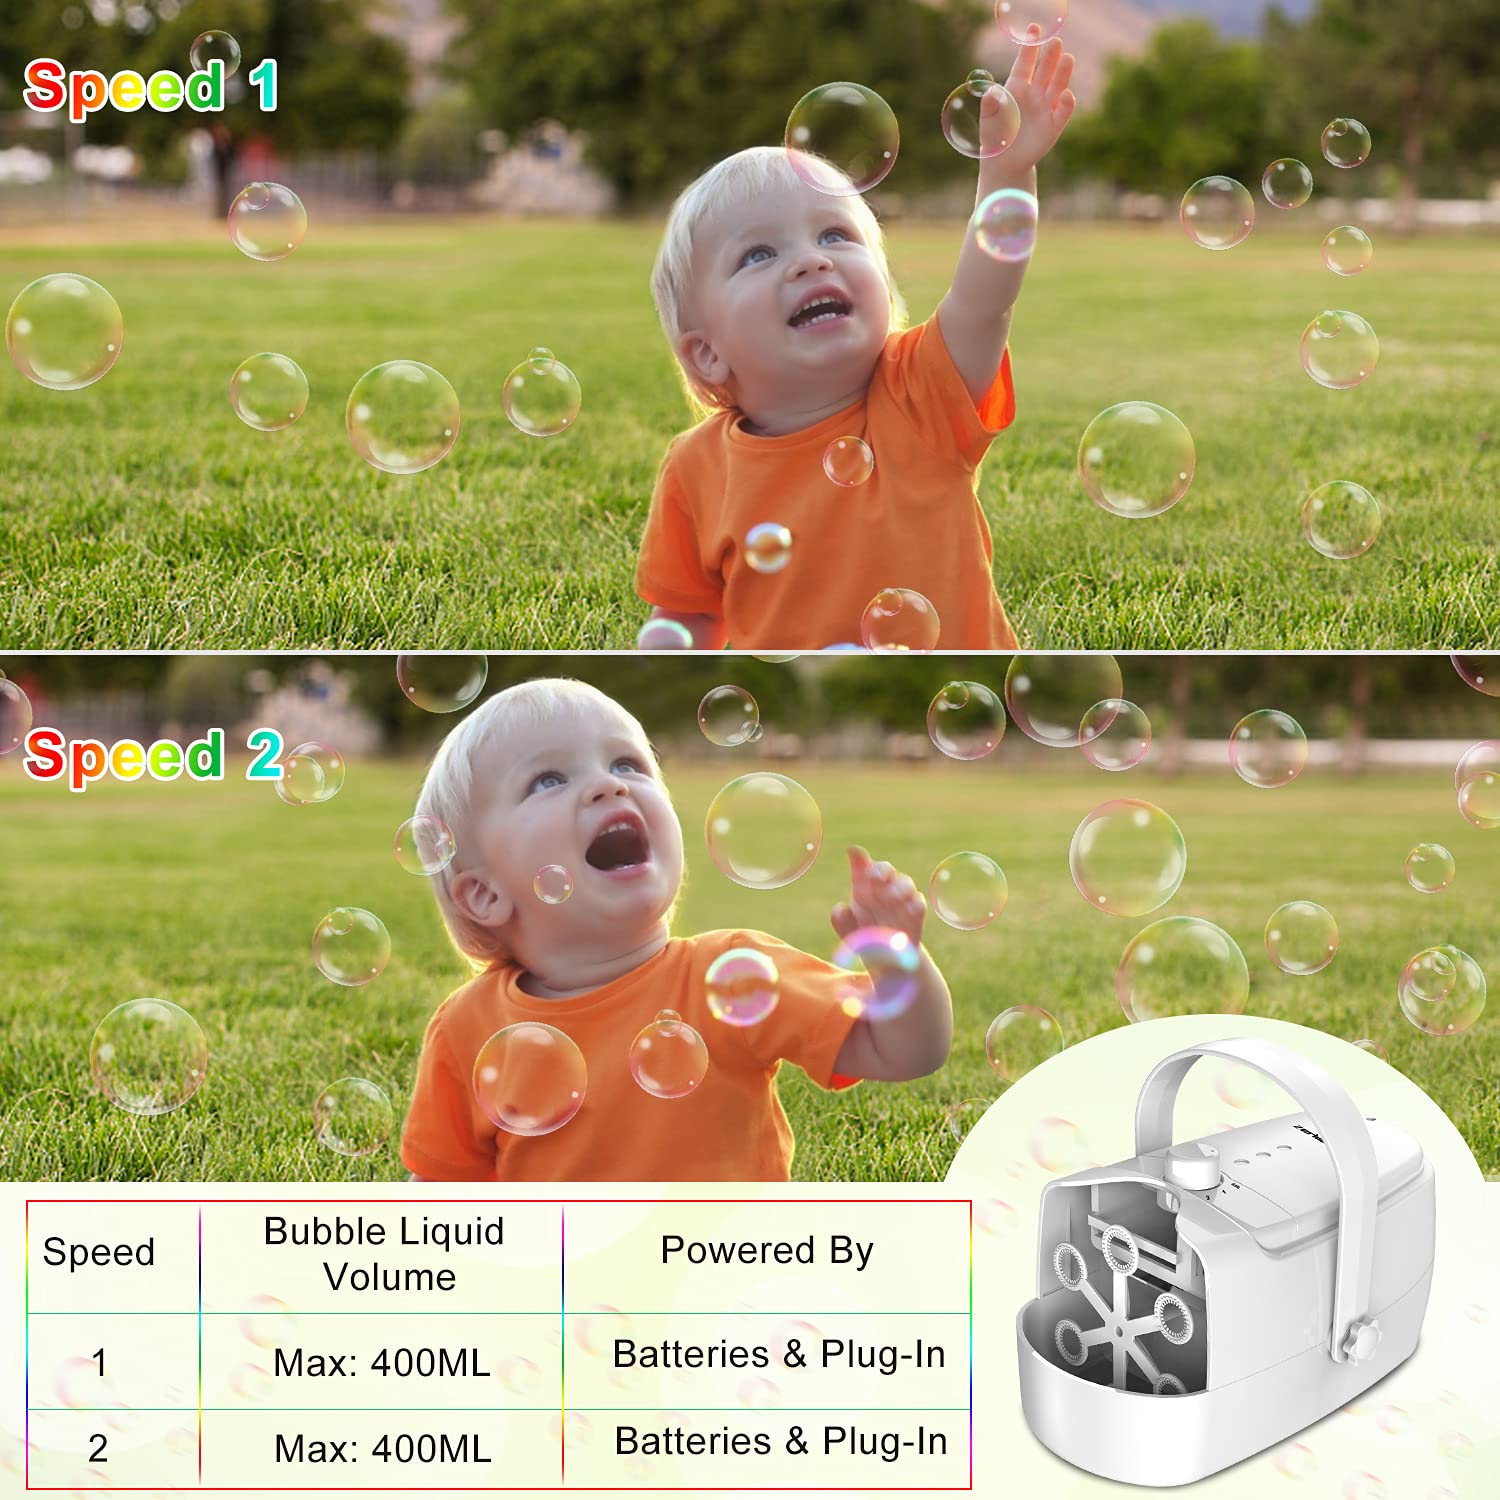 Bubble Machine Durable Automatic Bubble Blower, 4800+ Bubbles Per Minute Bubbles for Kids Toddlers Bubble Maker Operated by Plugin or Batteries Bubble Toys for Indoor Outdoor Birthday Party